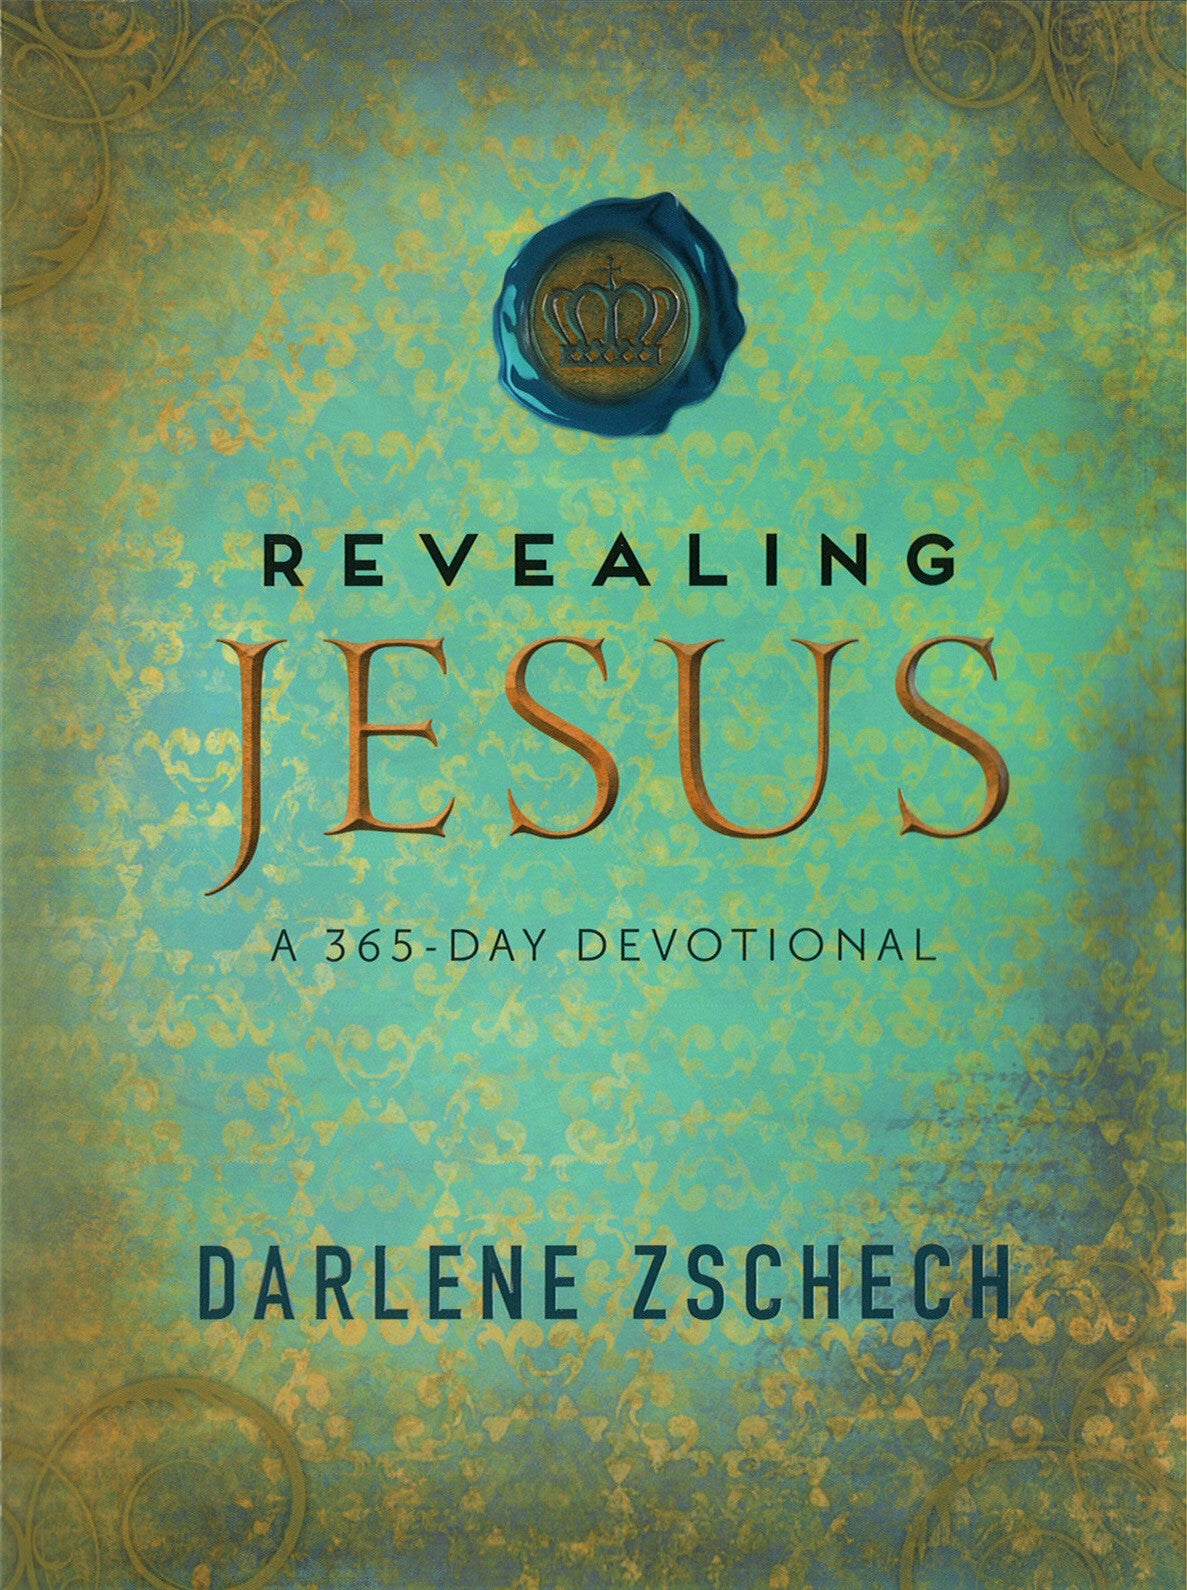 ROCKONLINE | New Creation Church | NCC | Joseph Prince | ROCK Bookshop | ROCK Bookstore | Star Vista | Devotional | Daily Devo | Christian Living | Worship | Faith | God's Word | Scriptures | God's Love | Revealing Jesus 365-Day Devotional by Darlene Zschech | Free delivery for Singapore Orders above $50